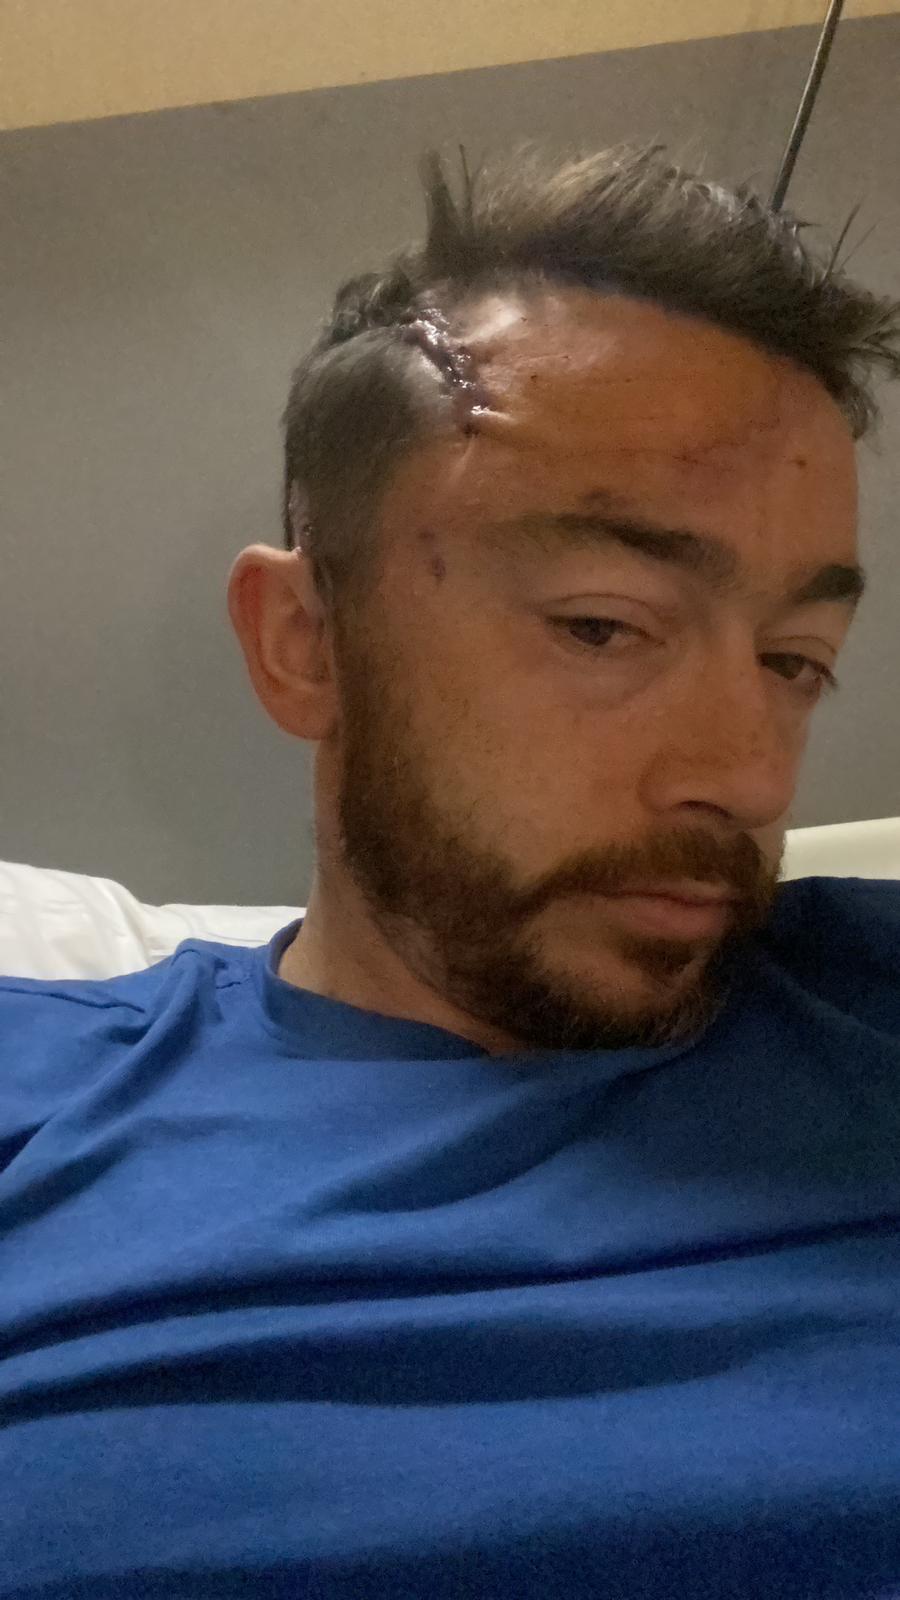 Tony is seen after surgery